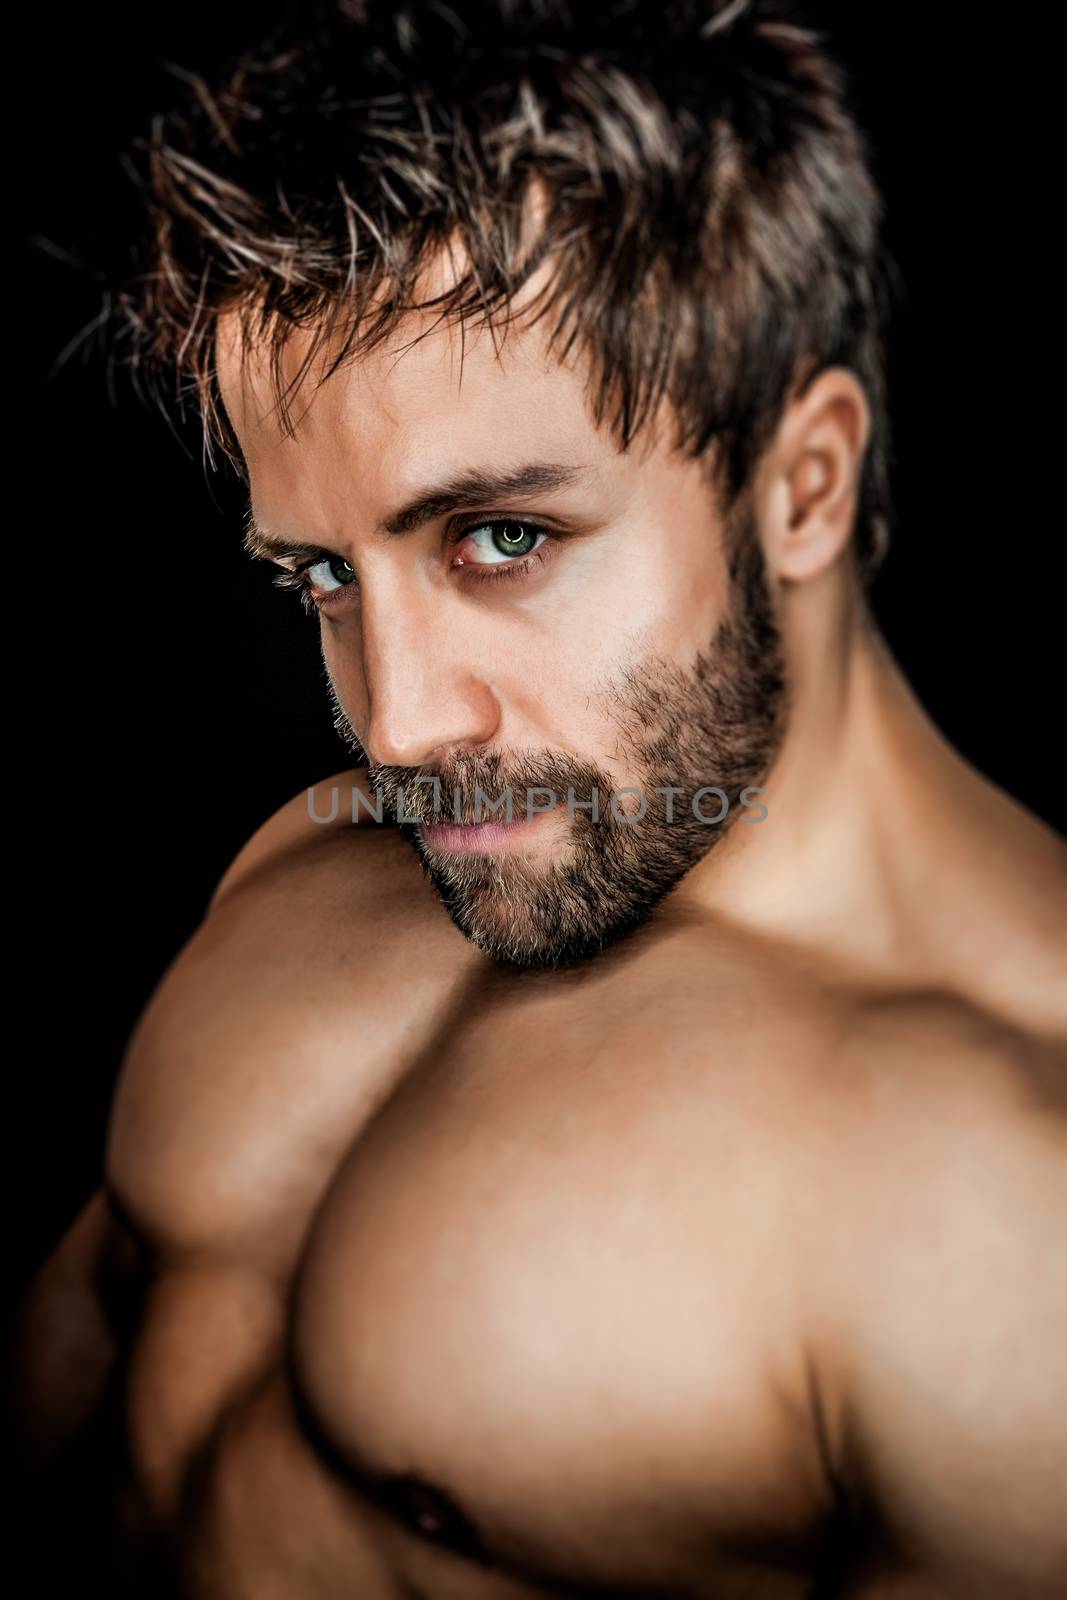 An image of a handsome young muscular sports man